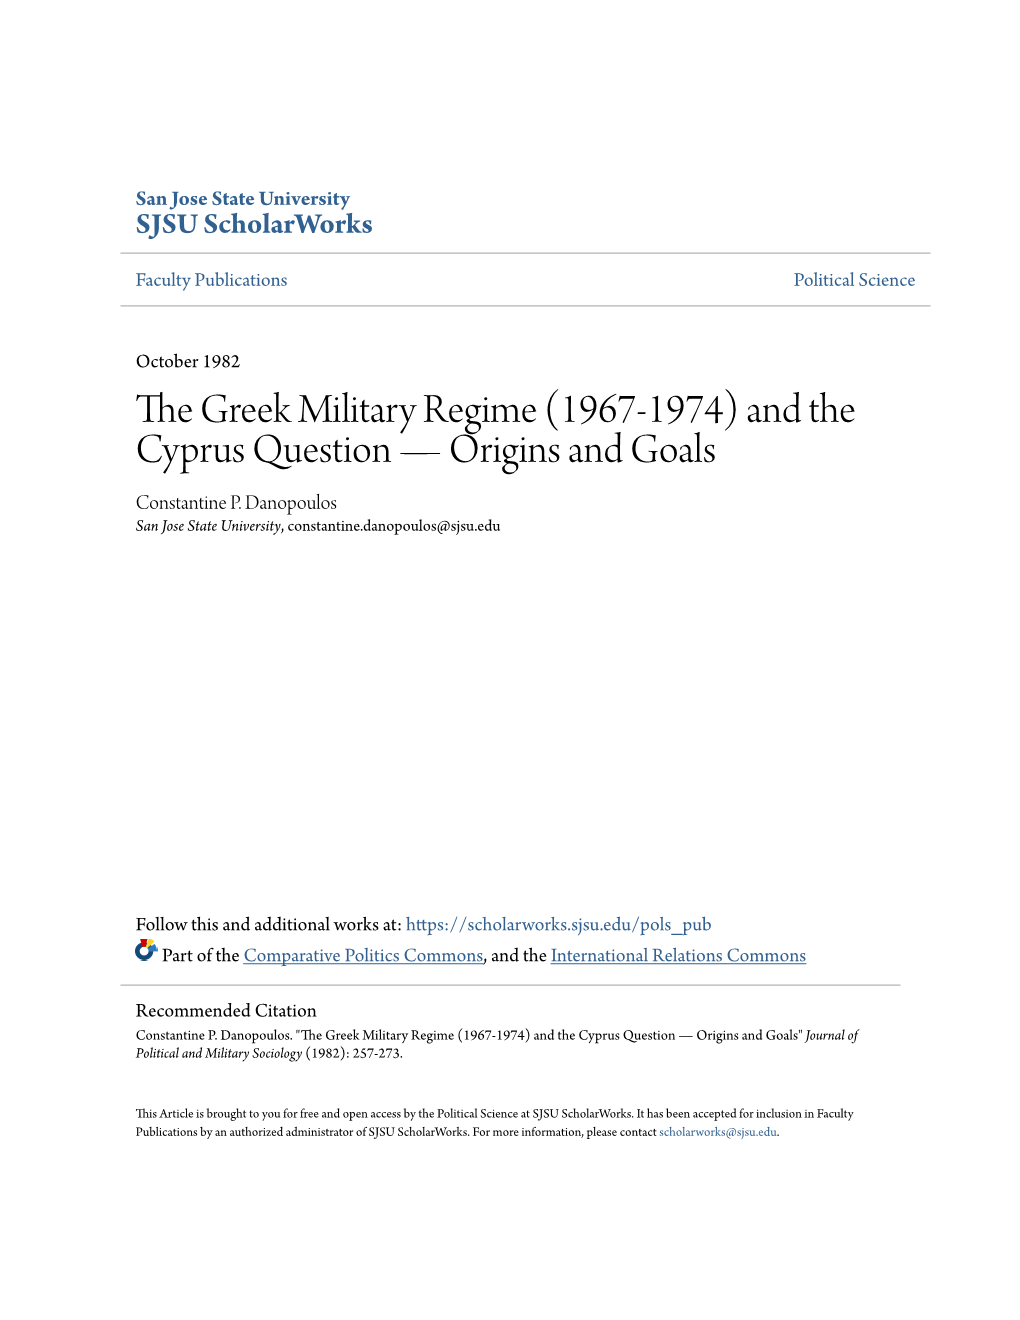 The Greek Military Regime (1967-1974) and the Cyprus Question — Origins and Goals Constantine P